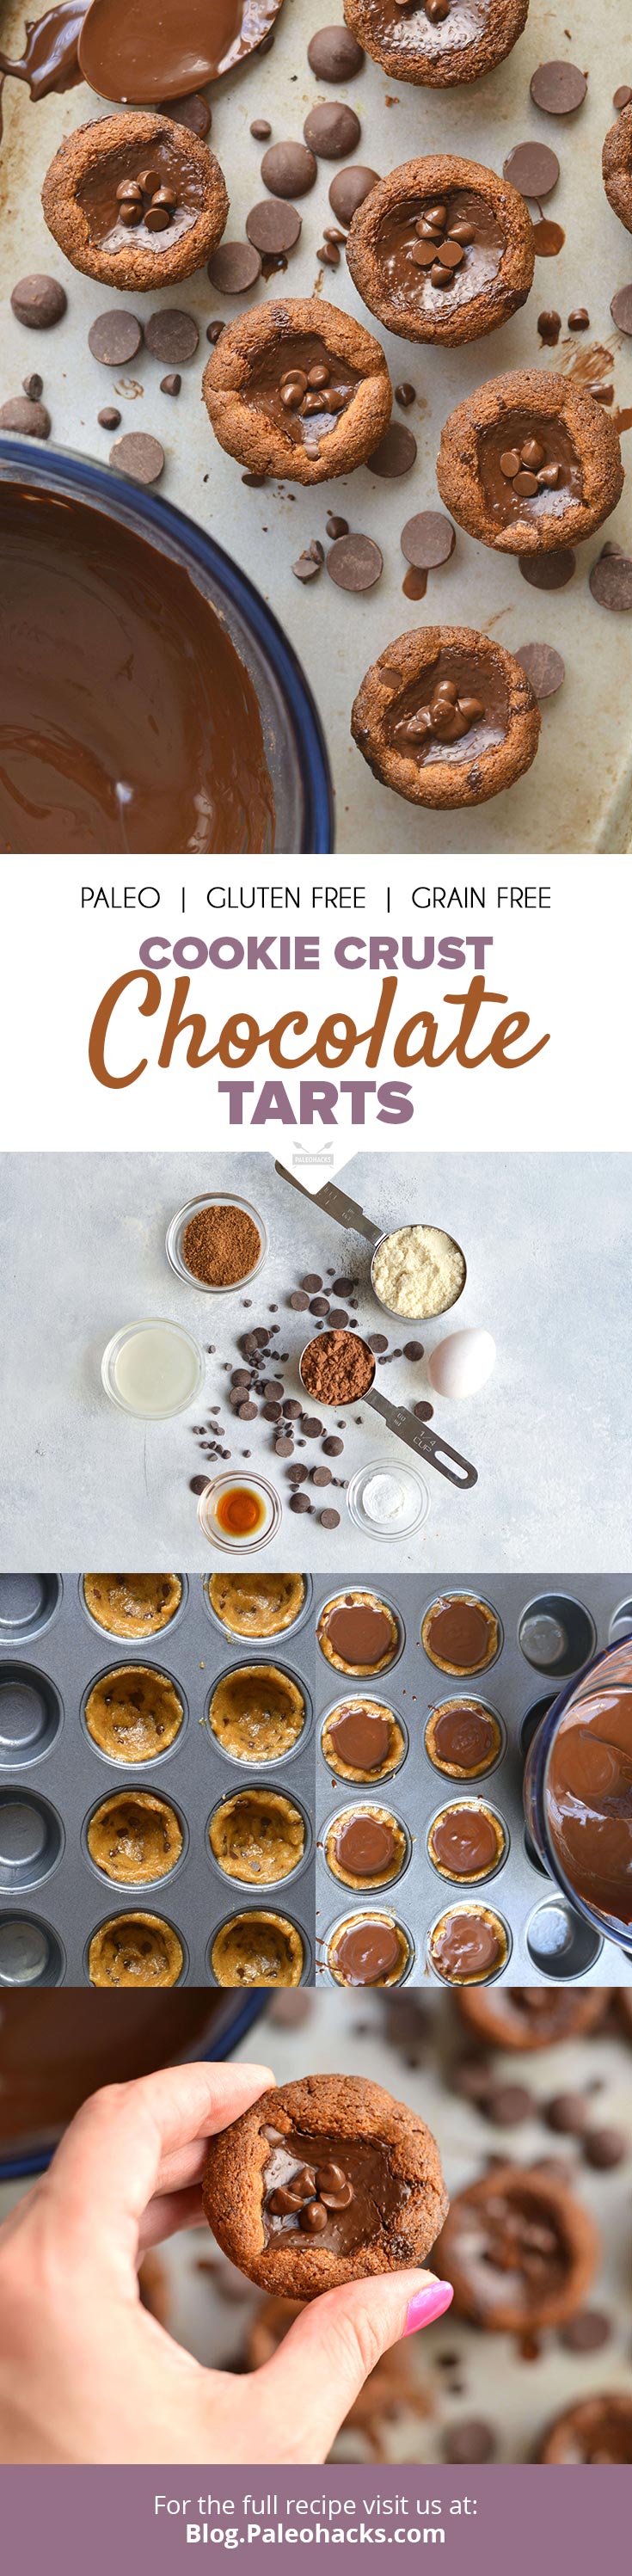 Made with a chocolate chip cookie crust and filled with double dark chocolate, these cookie-crusted tarts are a dessert dream!